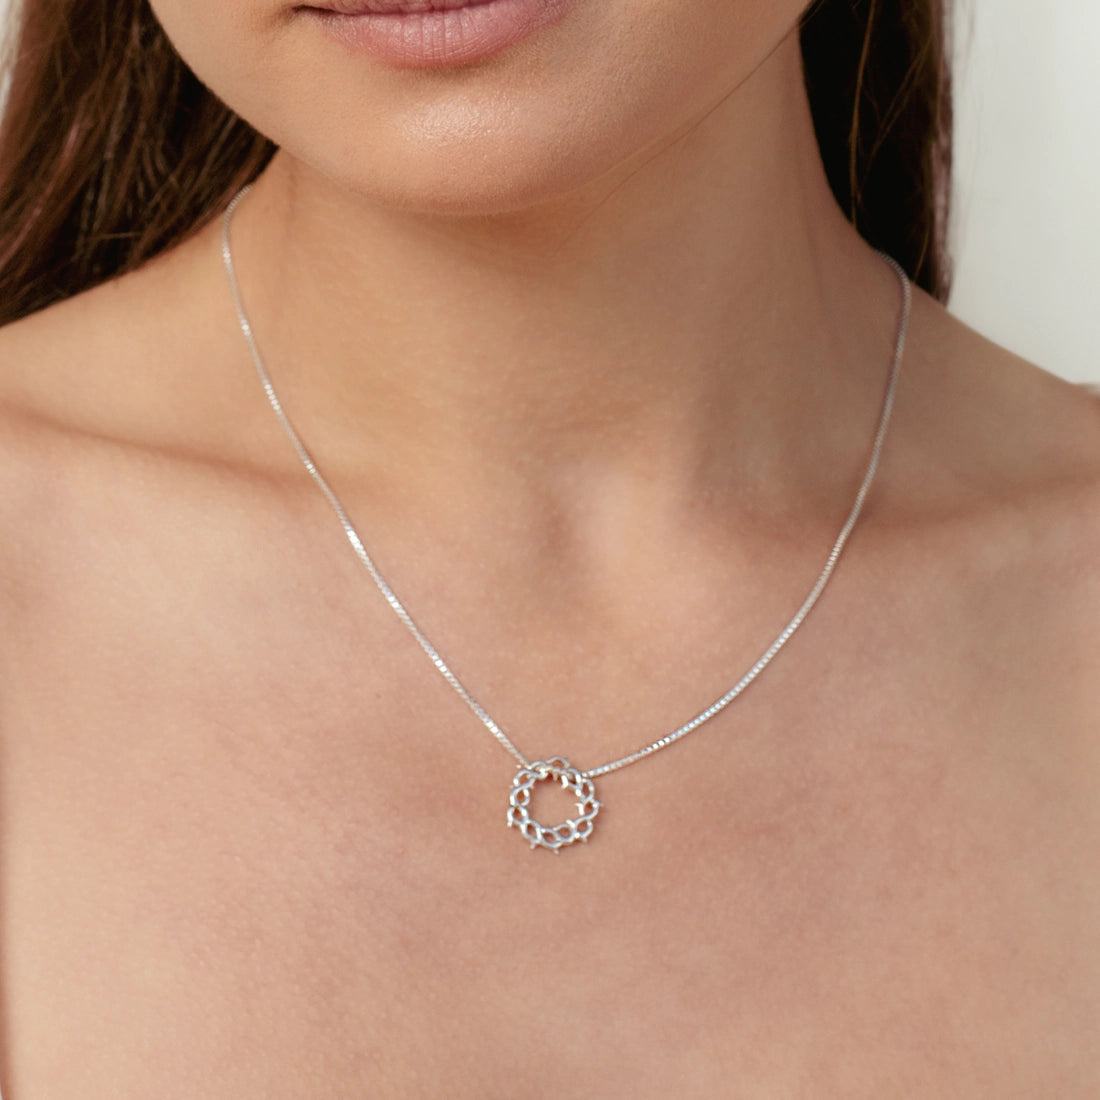 Christian woman wearing silver Crown of Thorns necklace from the Insignia Collection by Rizen Jewelry